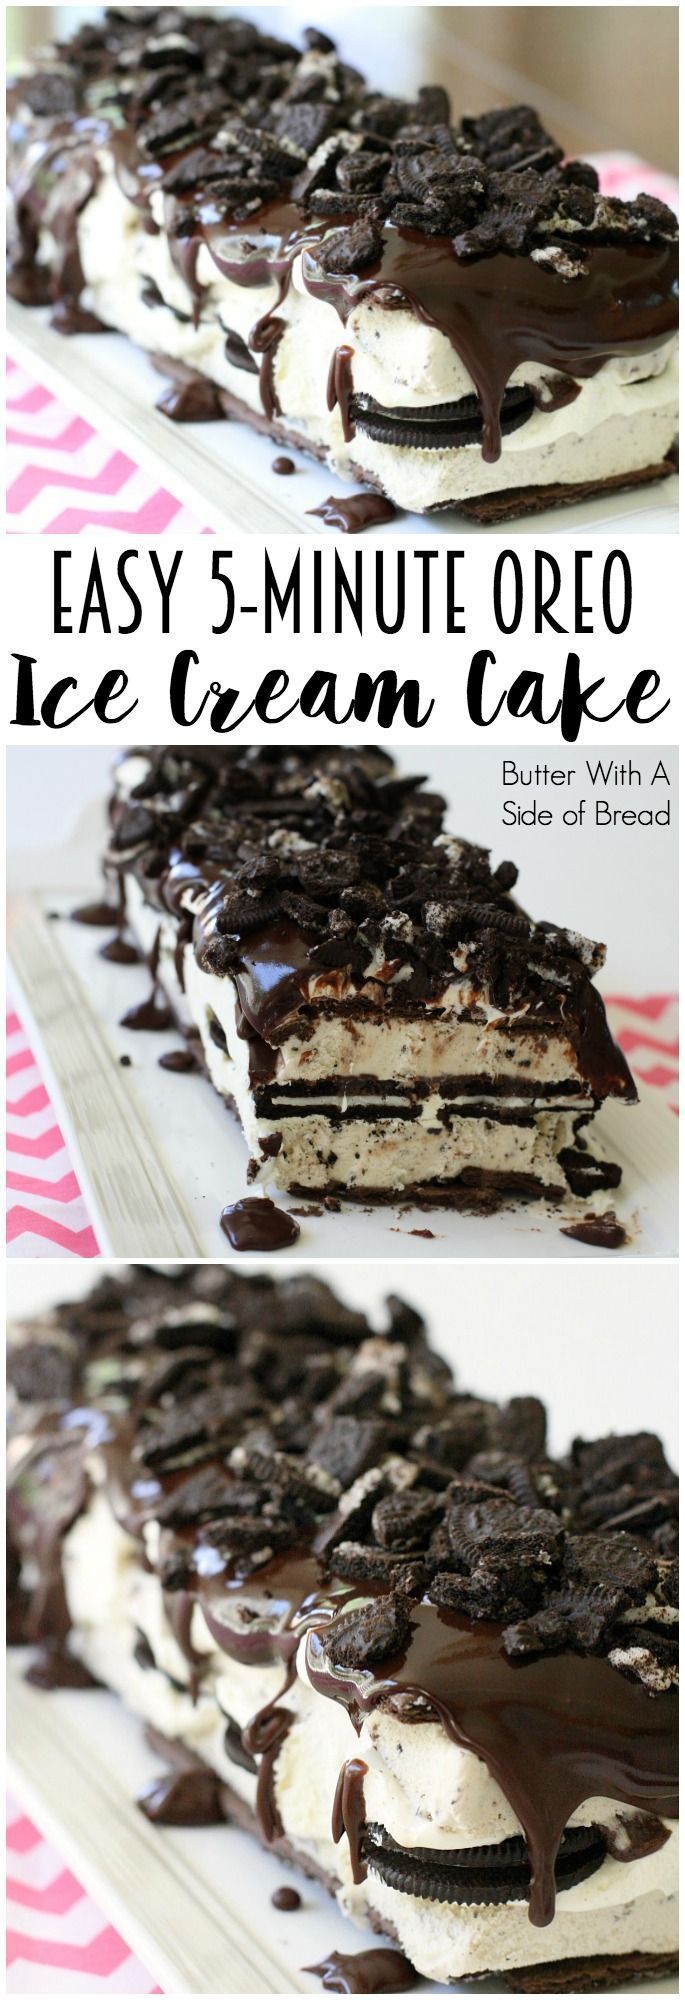 Easy 5-Minute Oreo Ice Cream Cake – Butter With A Side of Bread